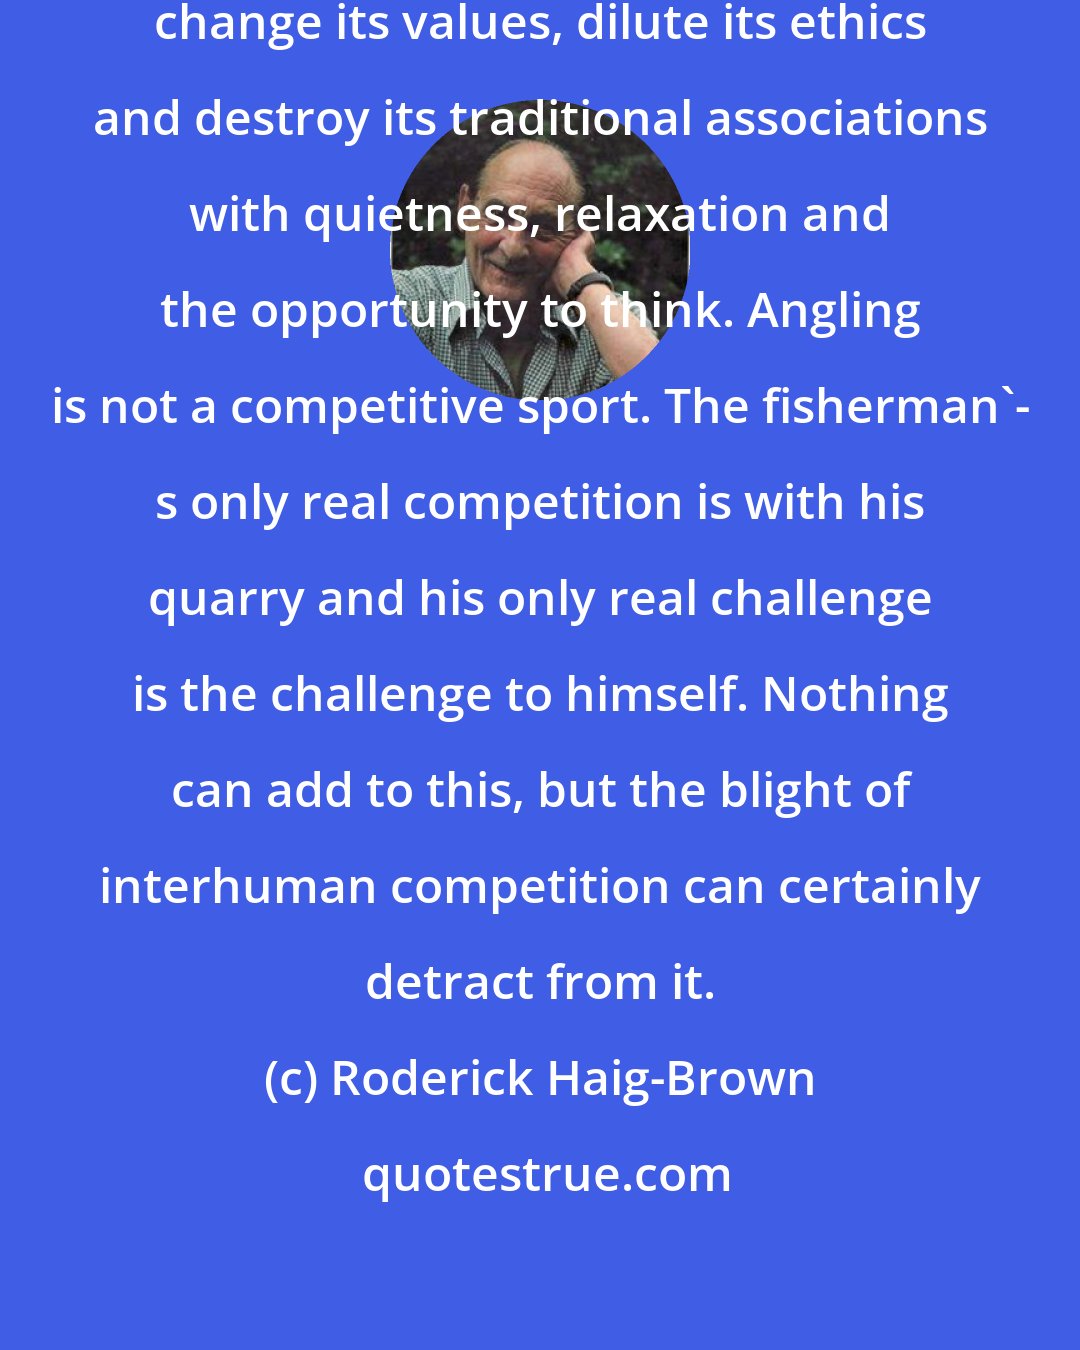 Roderick Haig-Brown: It is quite easy to debase the sport, change its values, dilute its ethics and destroy its traditional associations with quietness, relaxation and the opportunity to think. Angling is not a competitive sport. The fisherman'- s only real competition is with his quarry and his only real challenge is the challenge to himself. Nothing can add to this, but the blight of interhuman competition can certainly detract from it.